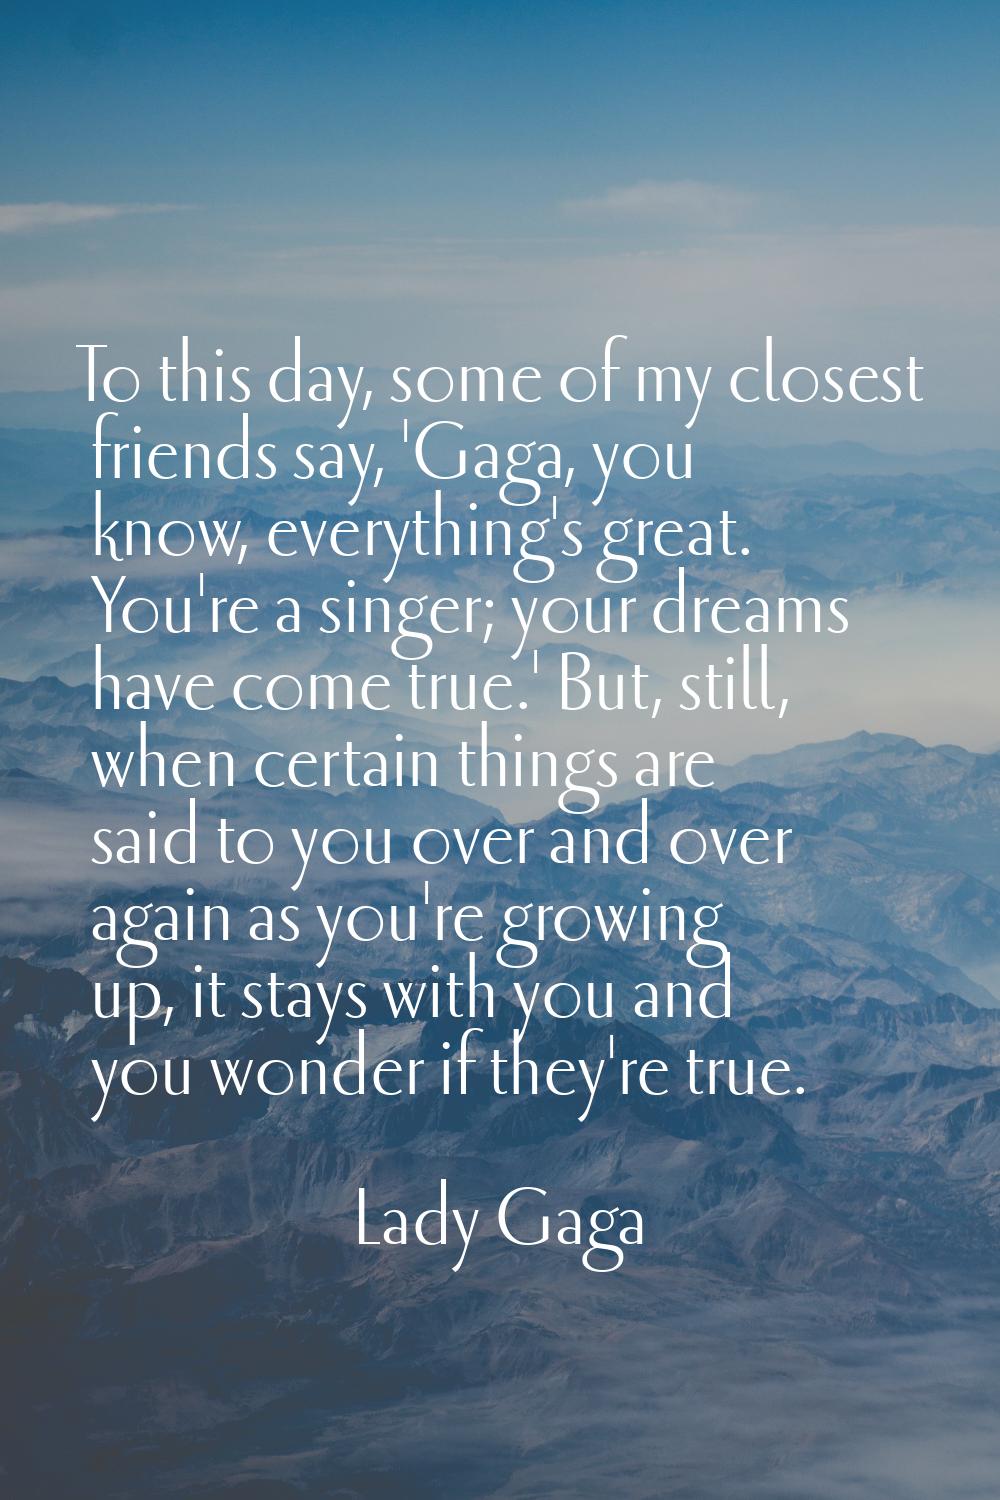 To this day, some of my closest friends say, 'Gaga, you know, everything's great. You're a singer; 